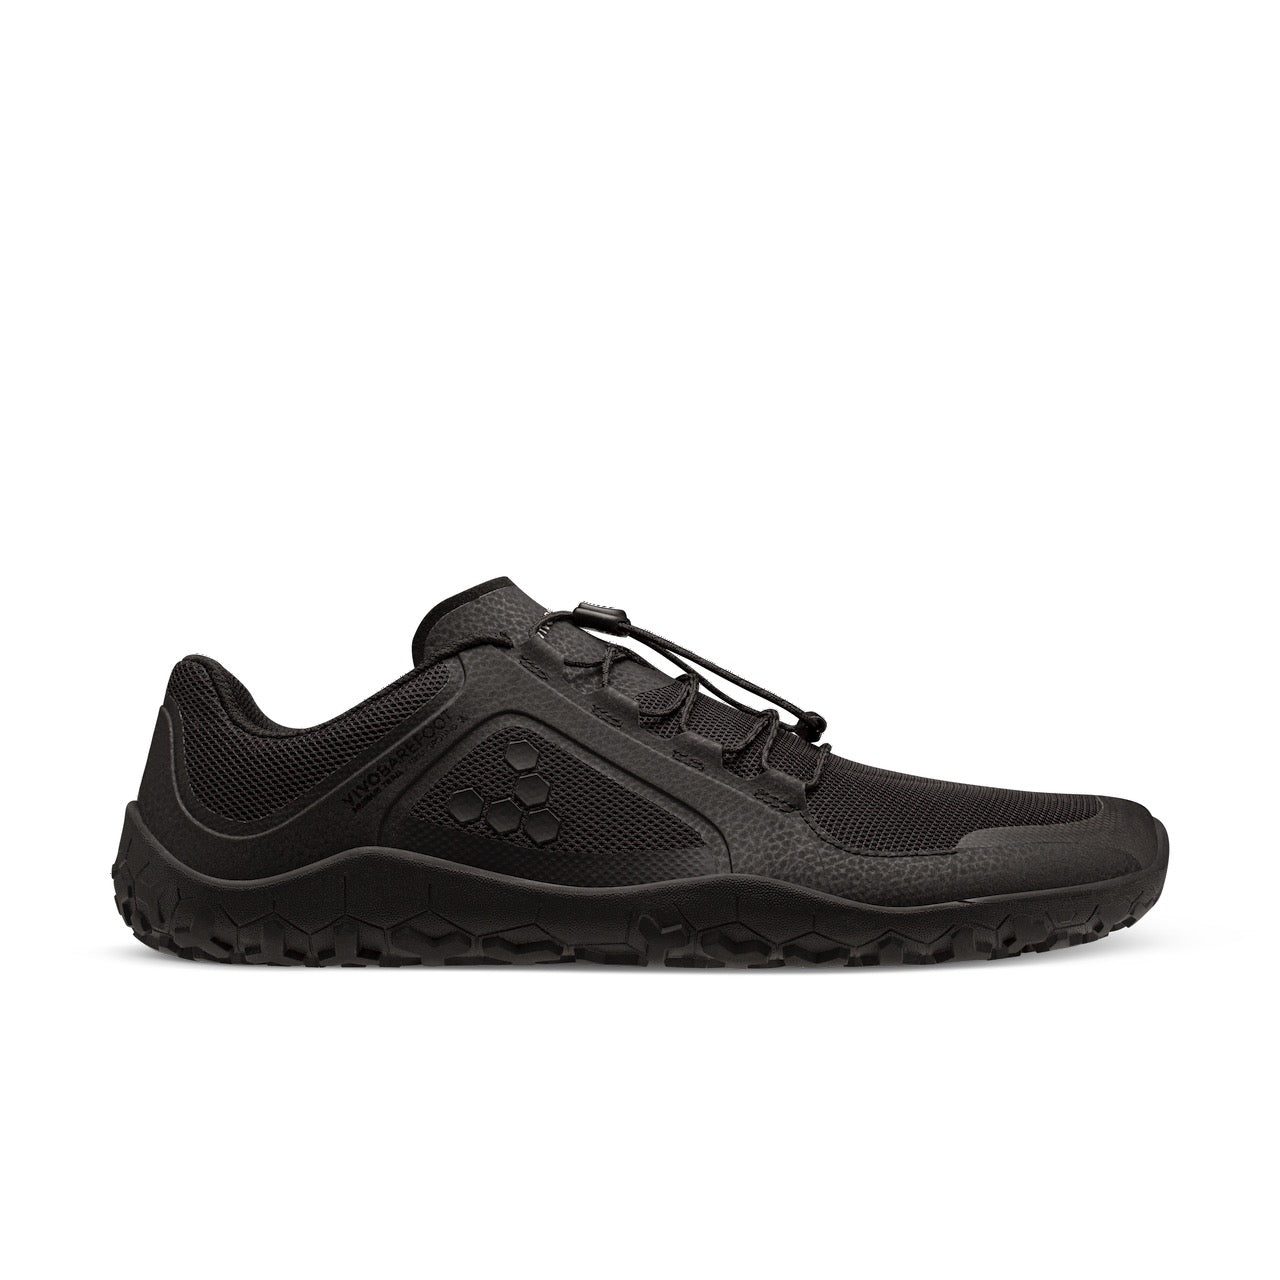 Men's Trail Running Barefoot Shoes